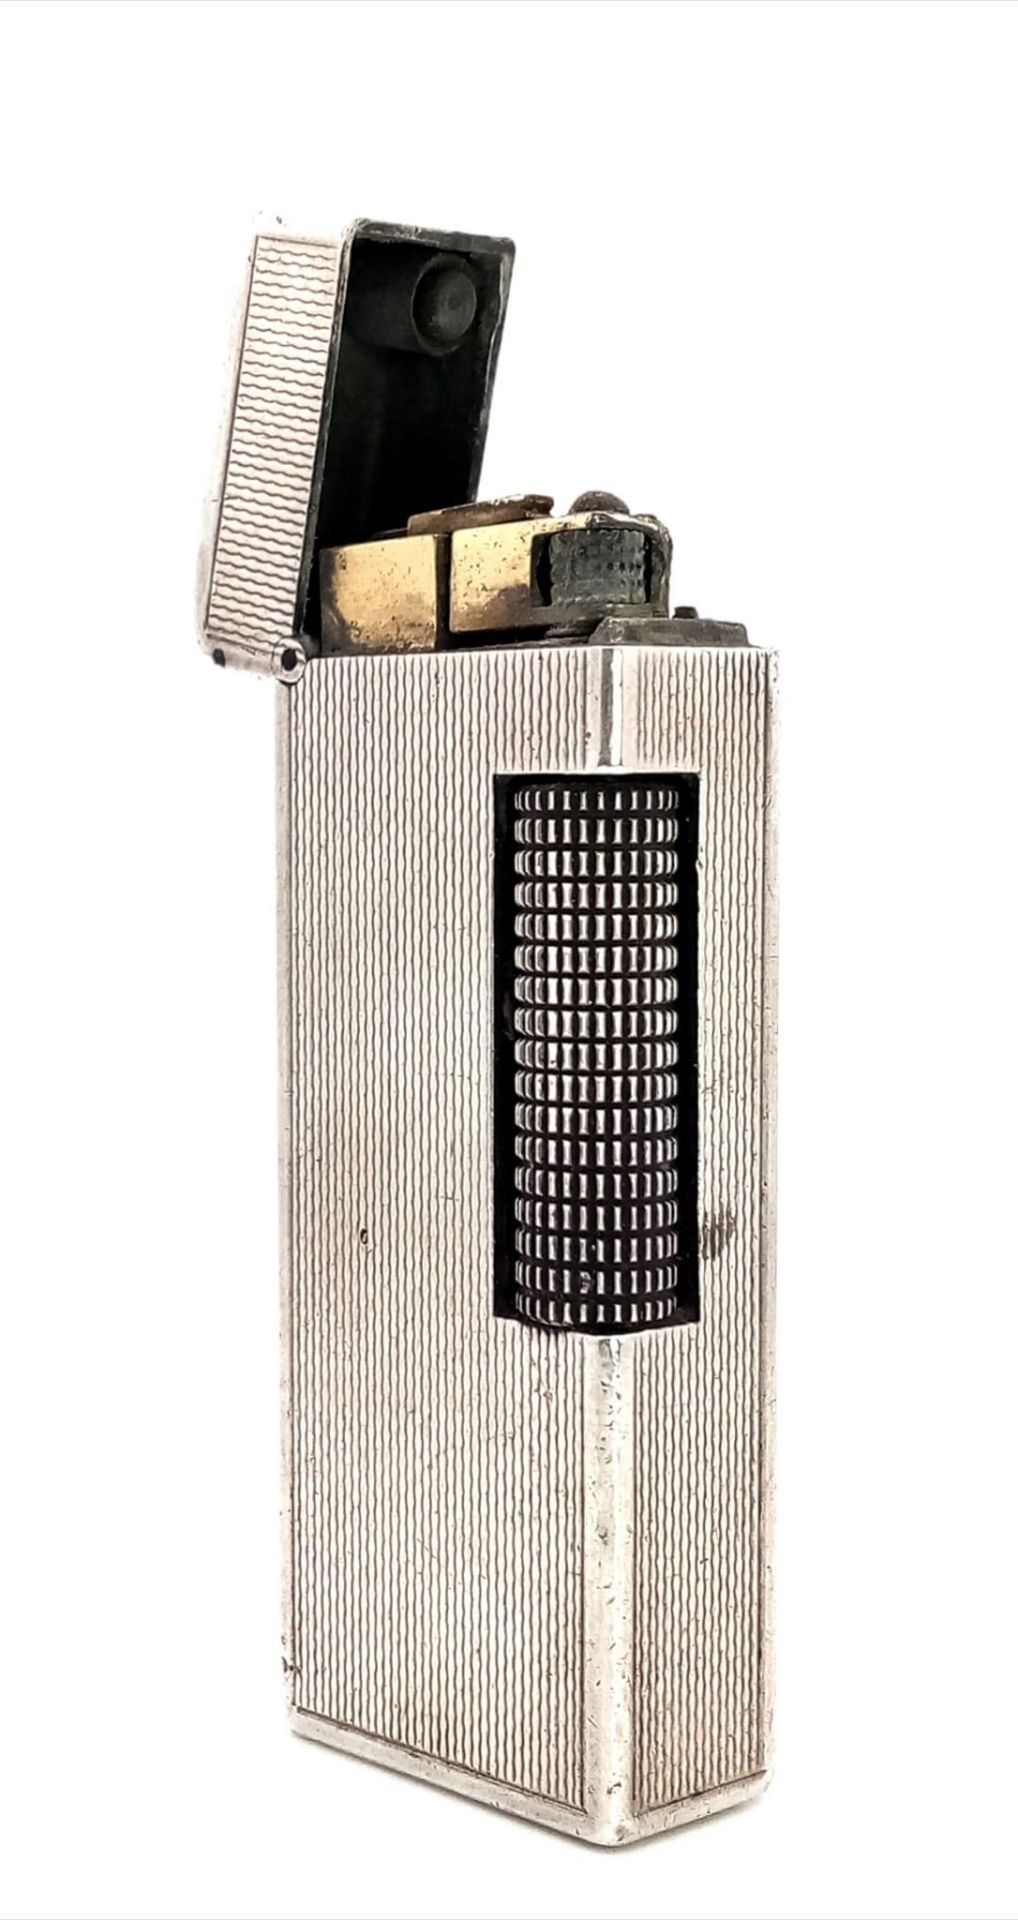 A Vintage 925 Silver Dunhill Lighter. Hallmarks on base. 6.6cm x 2.5cm. Needs some gas. 88.6g